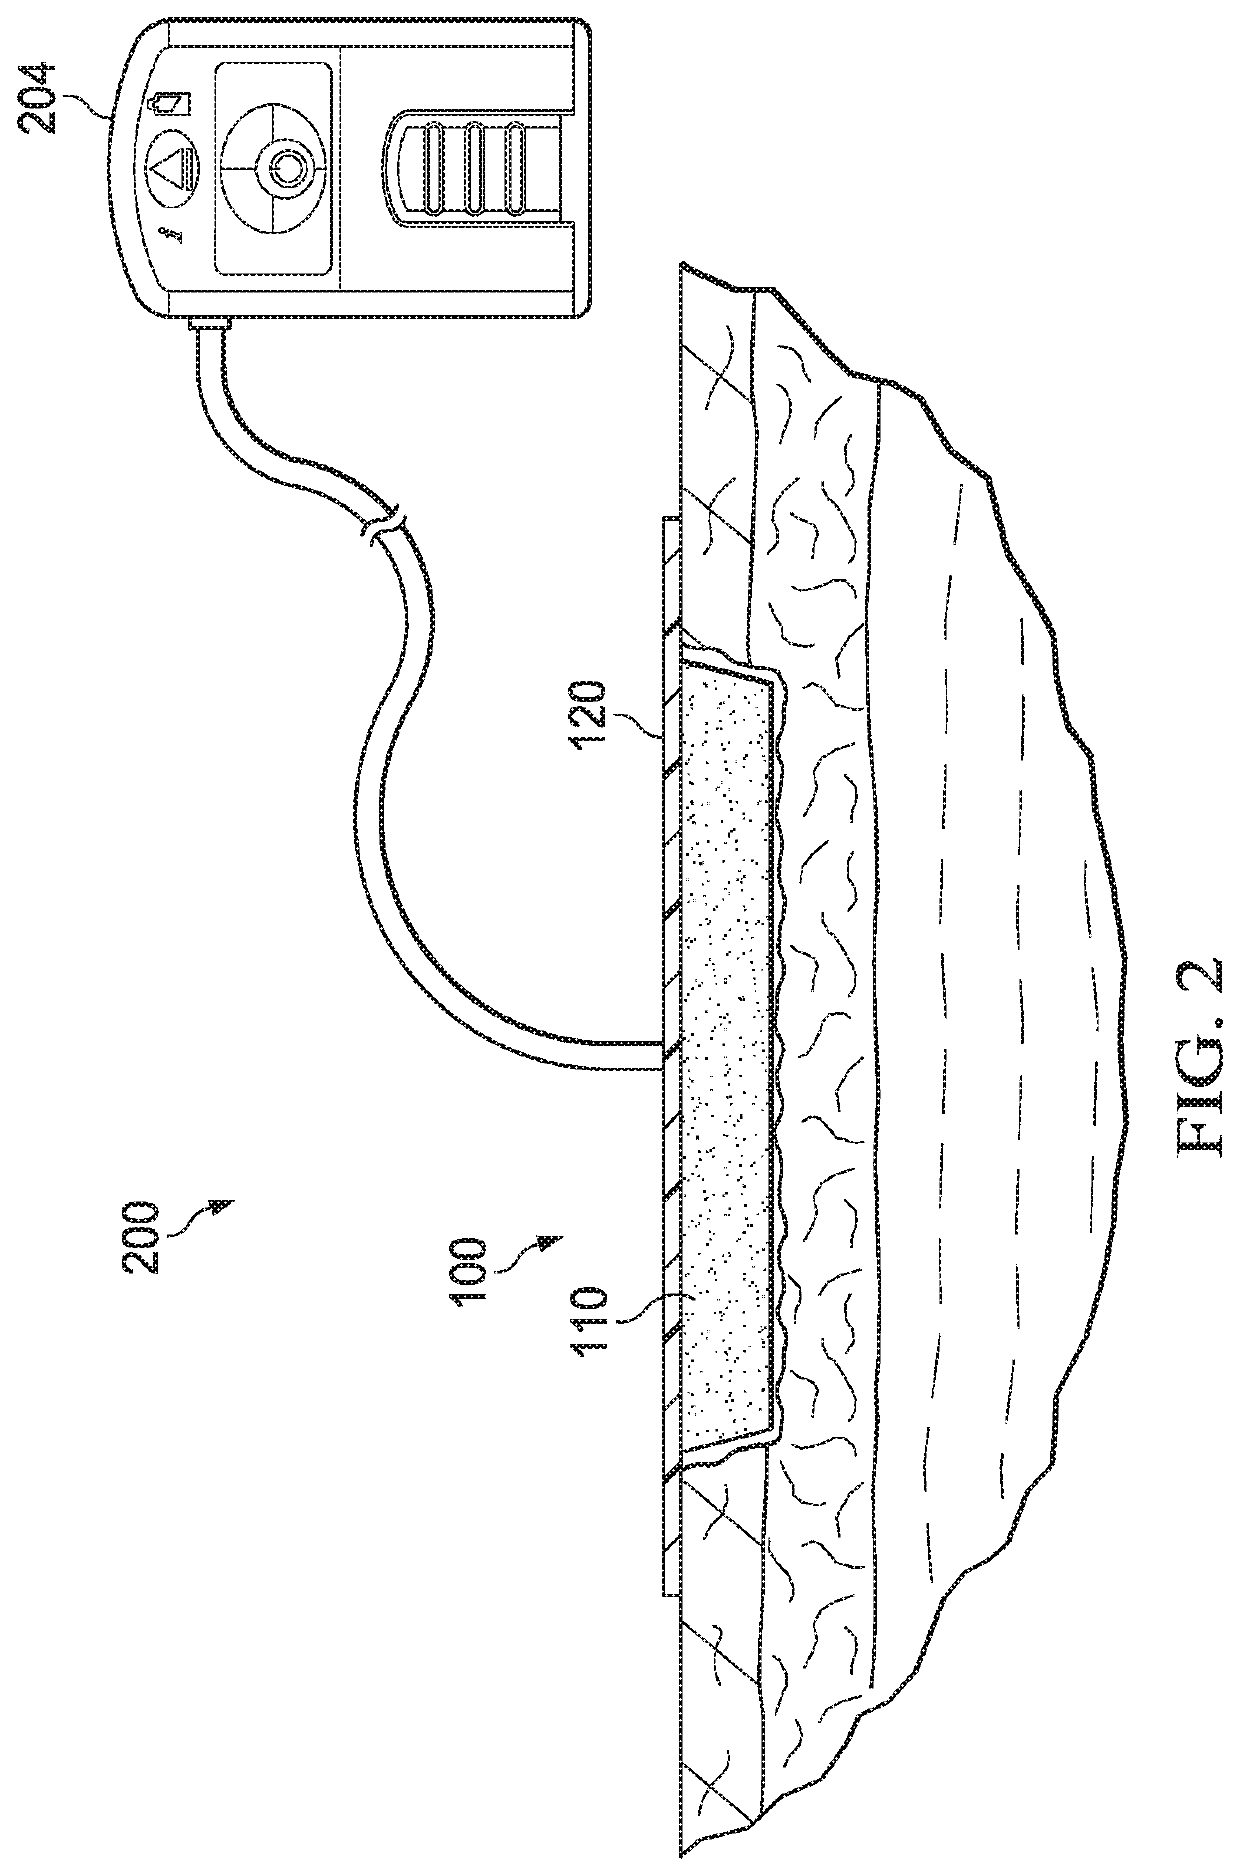 Elastically deformable wound dressings